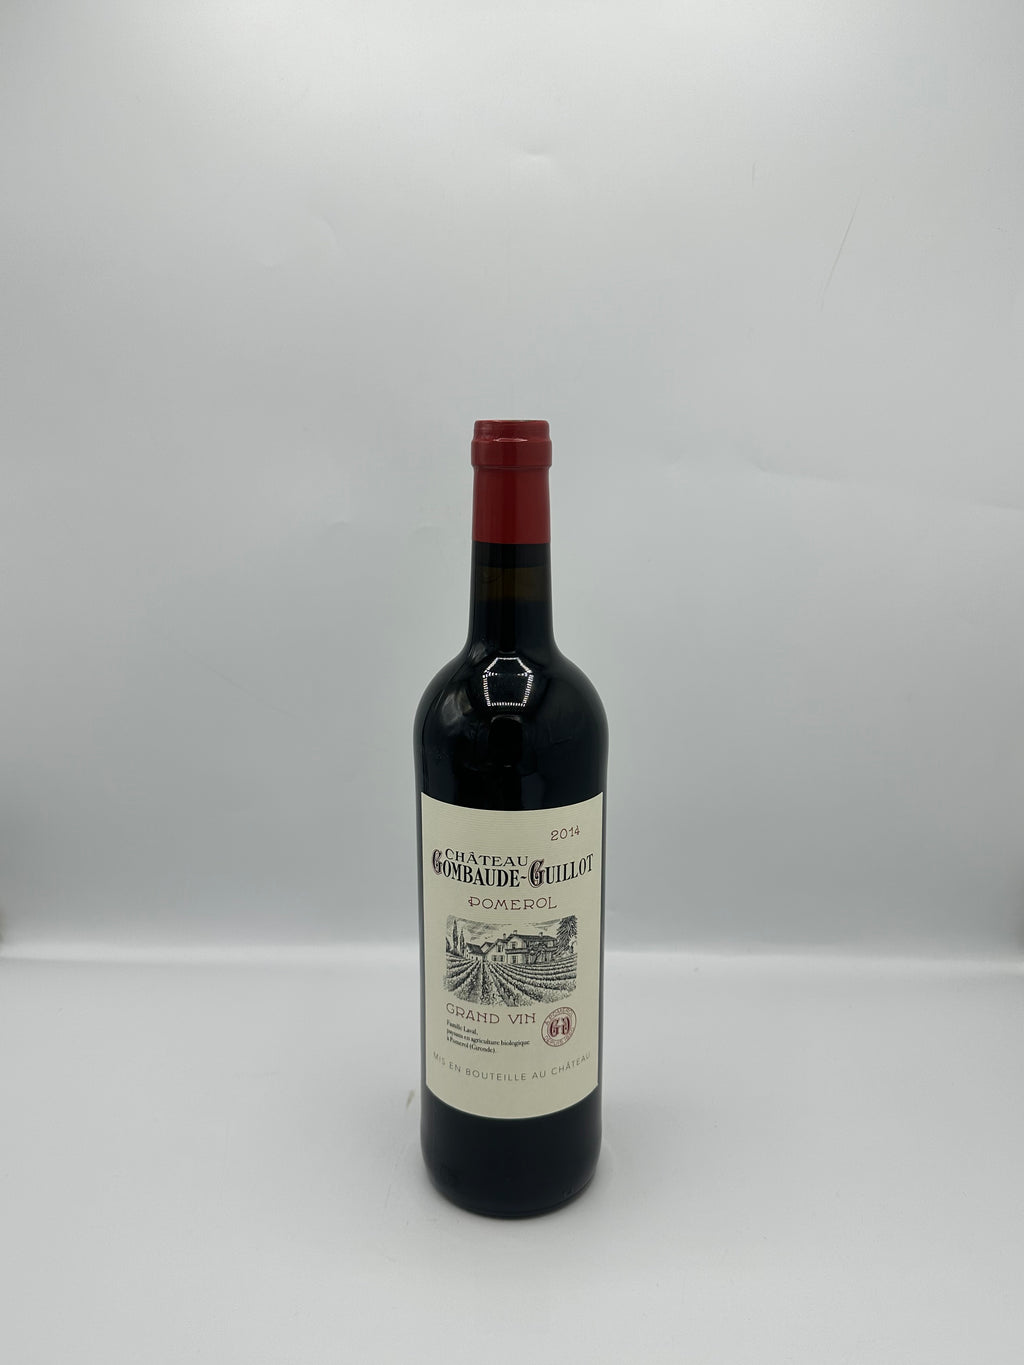 Pomerol 2014 Tinto - Chateau Gombaude-Guillot 